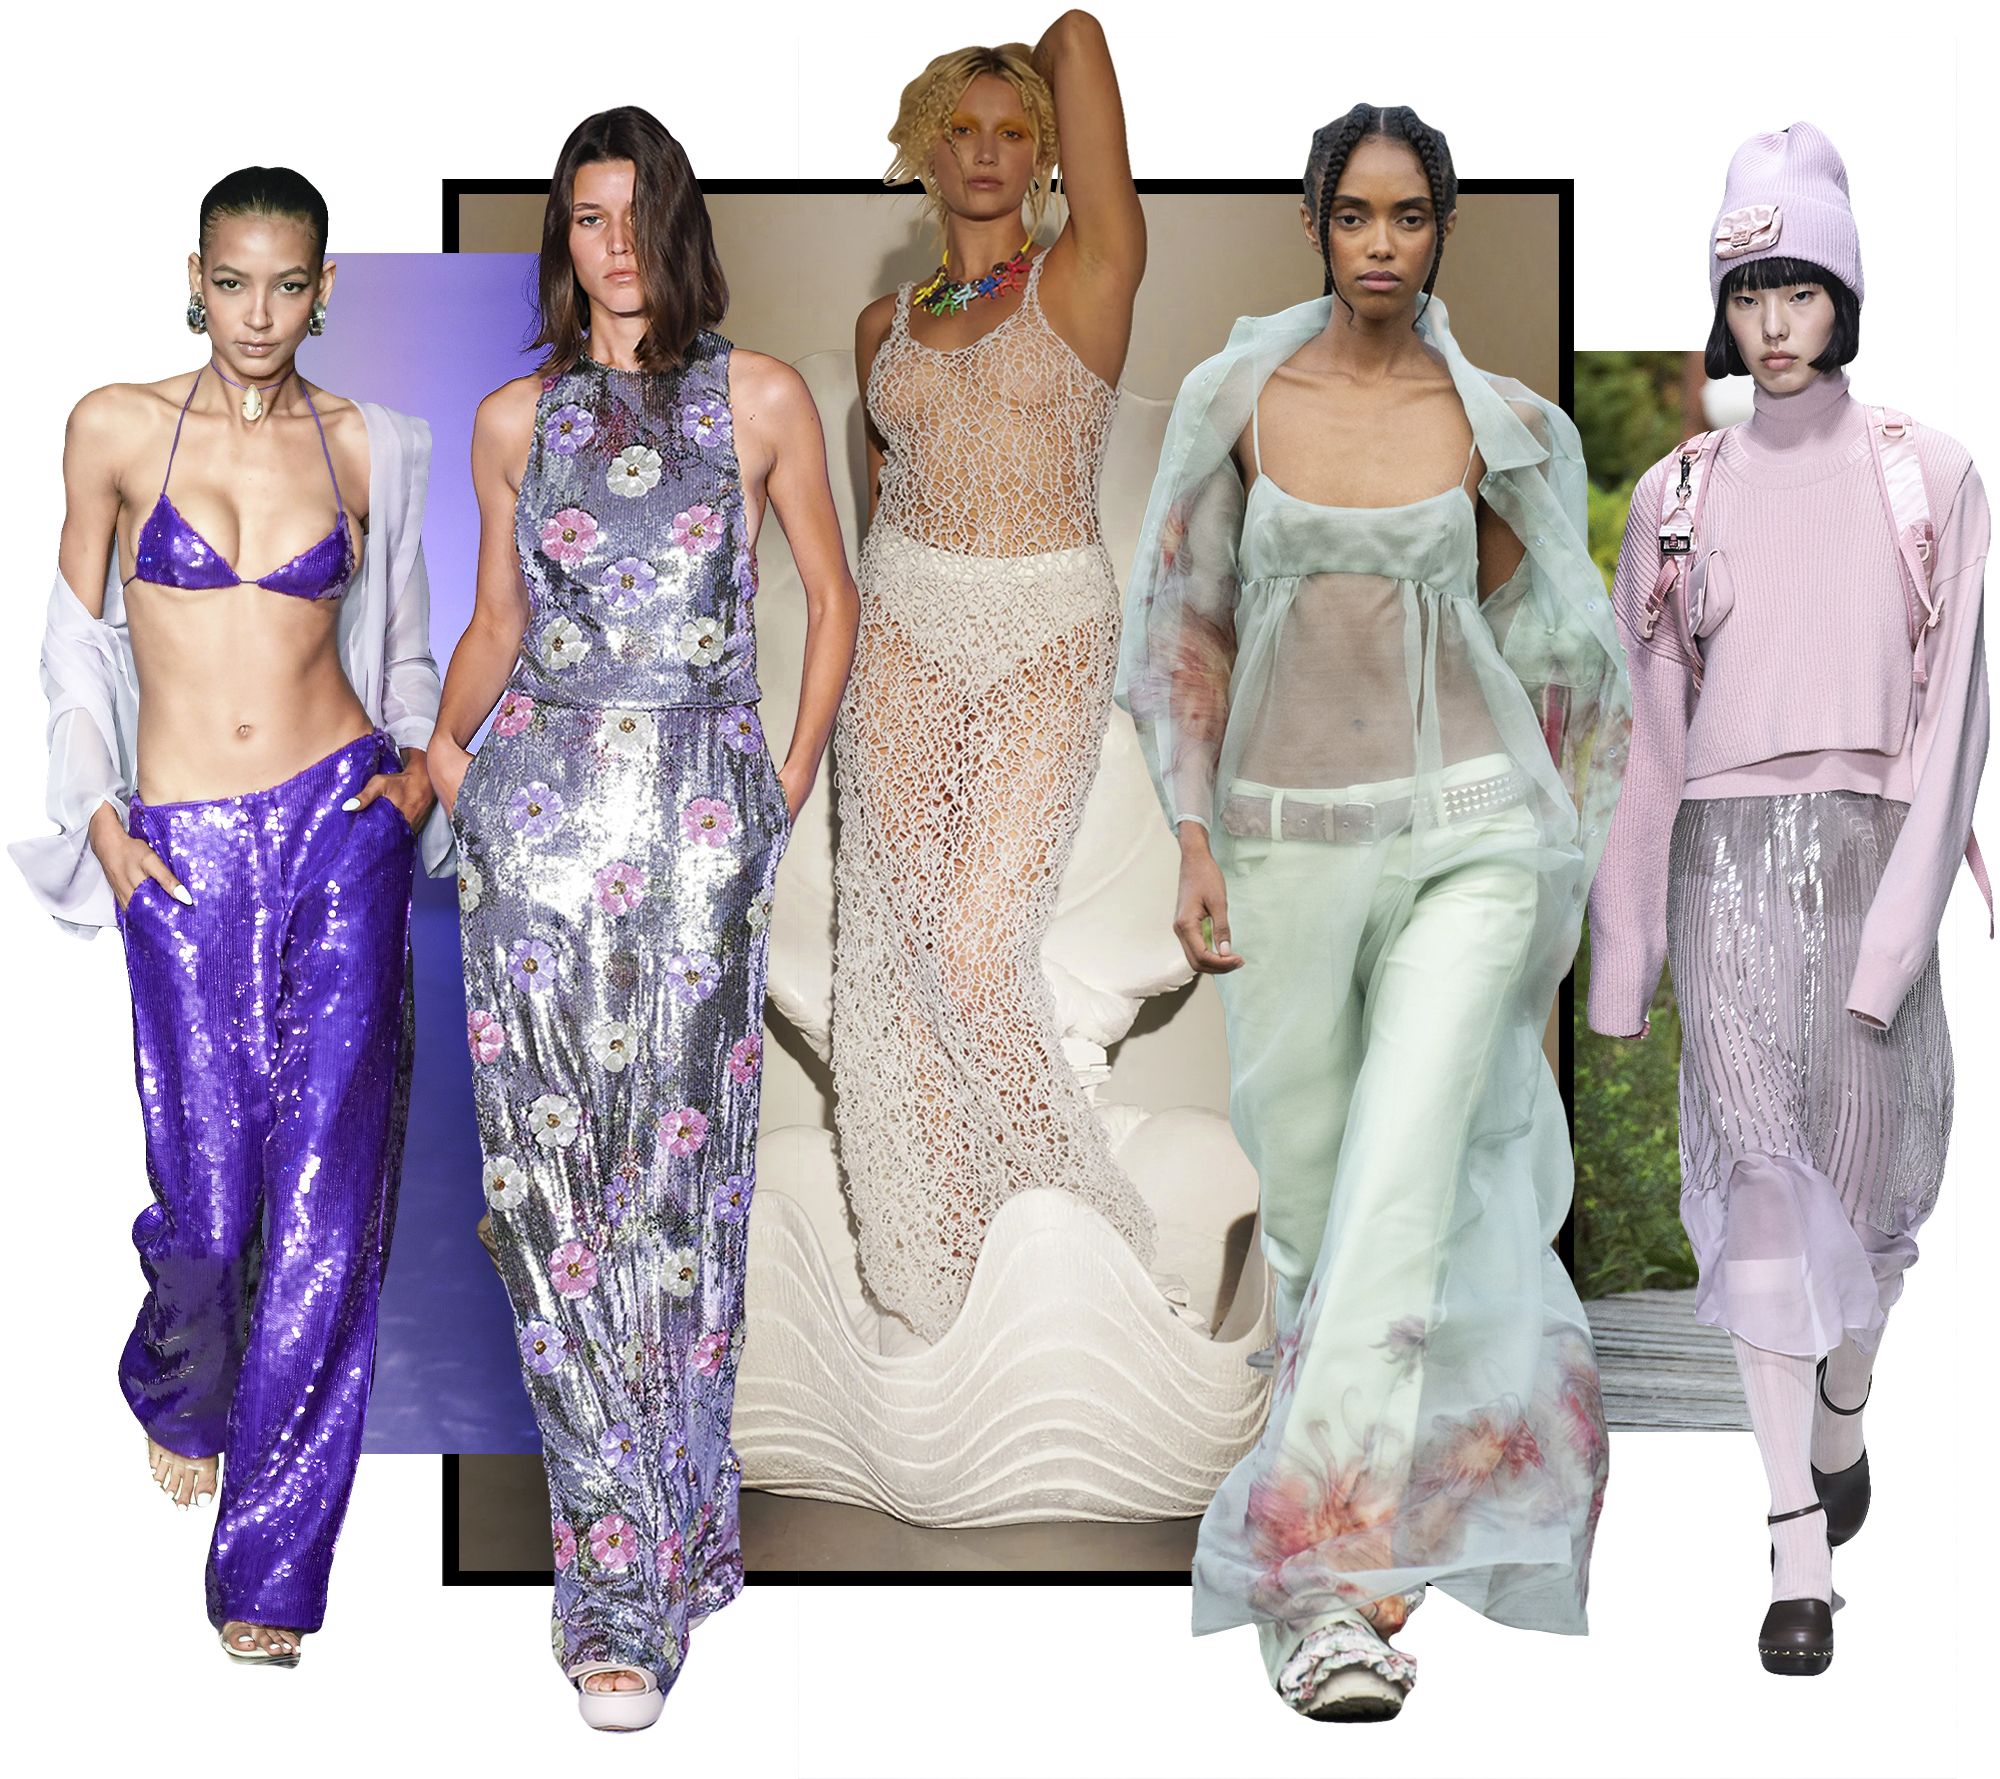 15 Top Spring/Summer 2023 Trends from the SS23 Runway